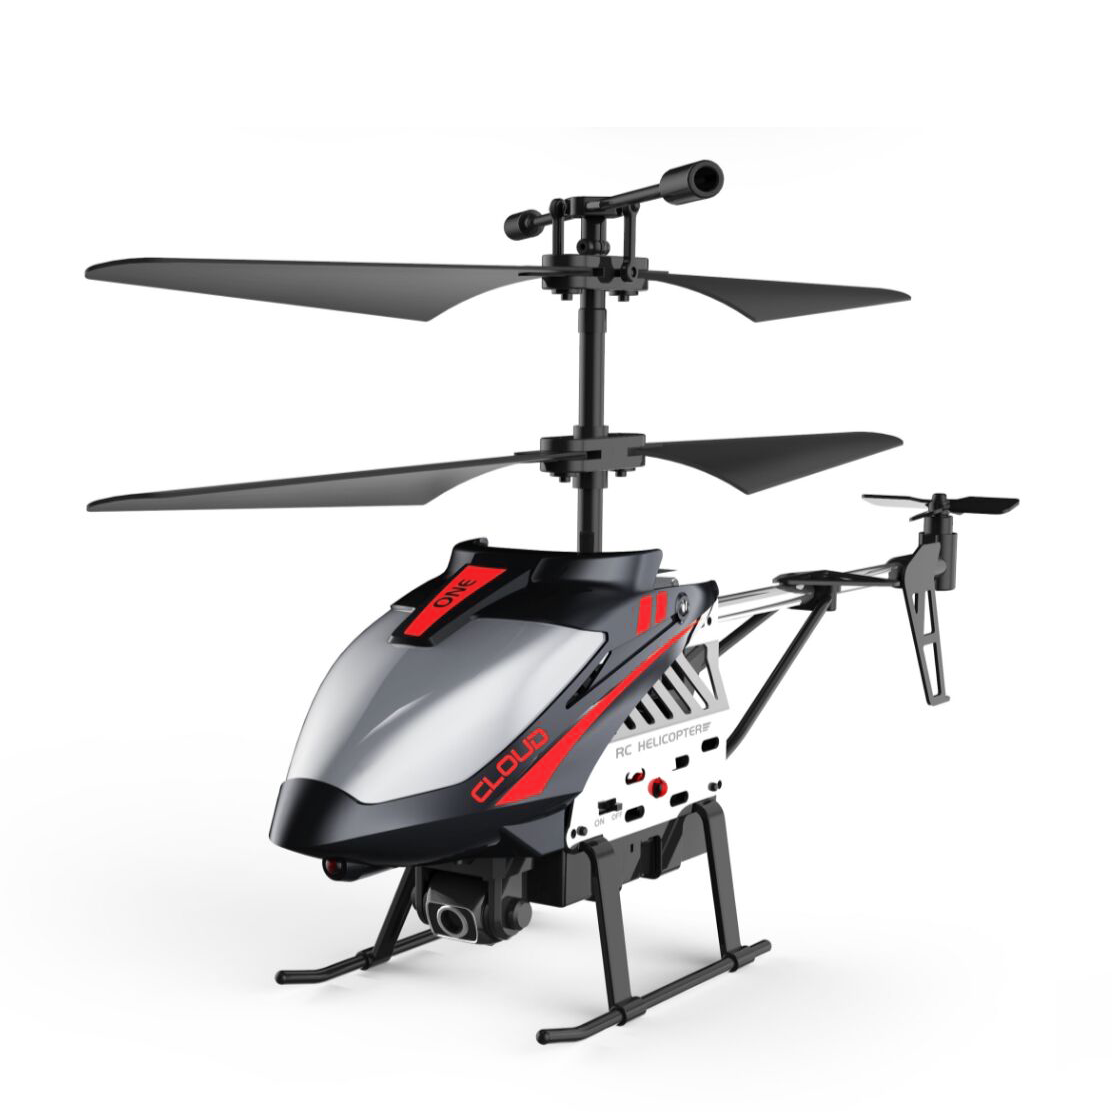 2.4G 4CH Sky Max RC Flying Helicopter with Camera and Lights